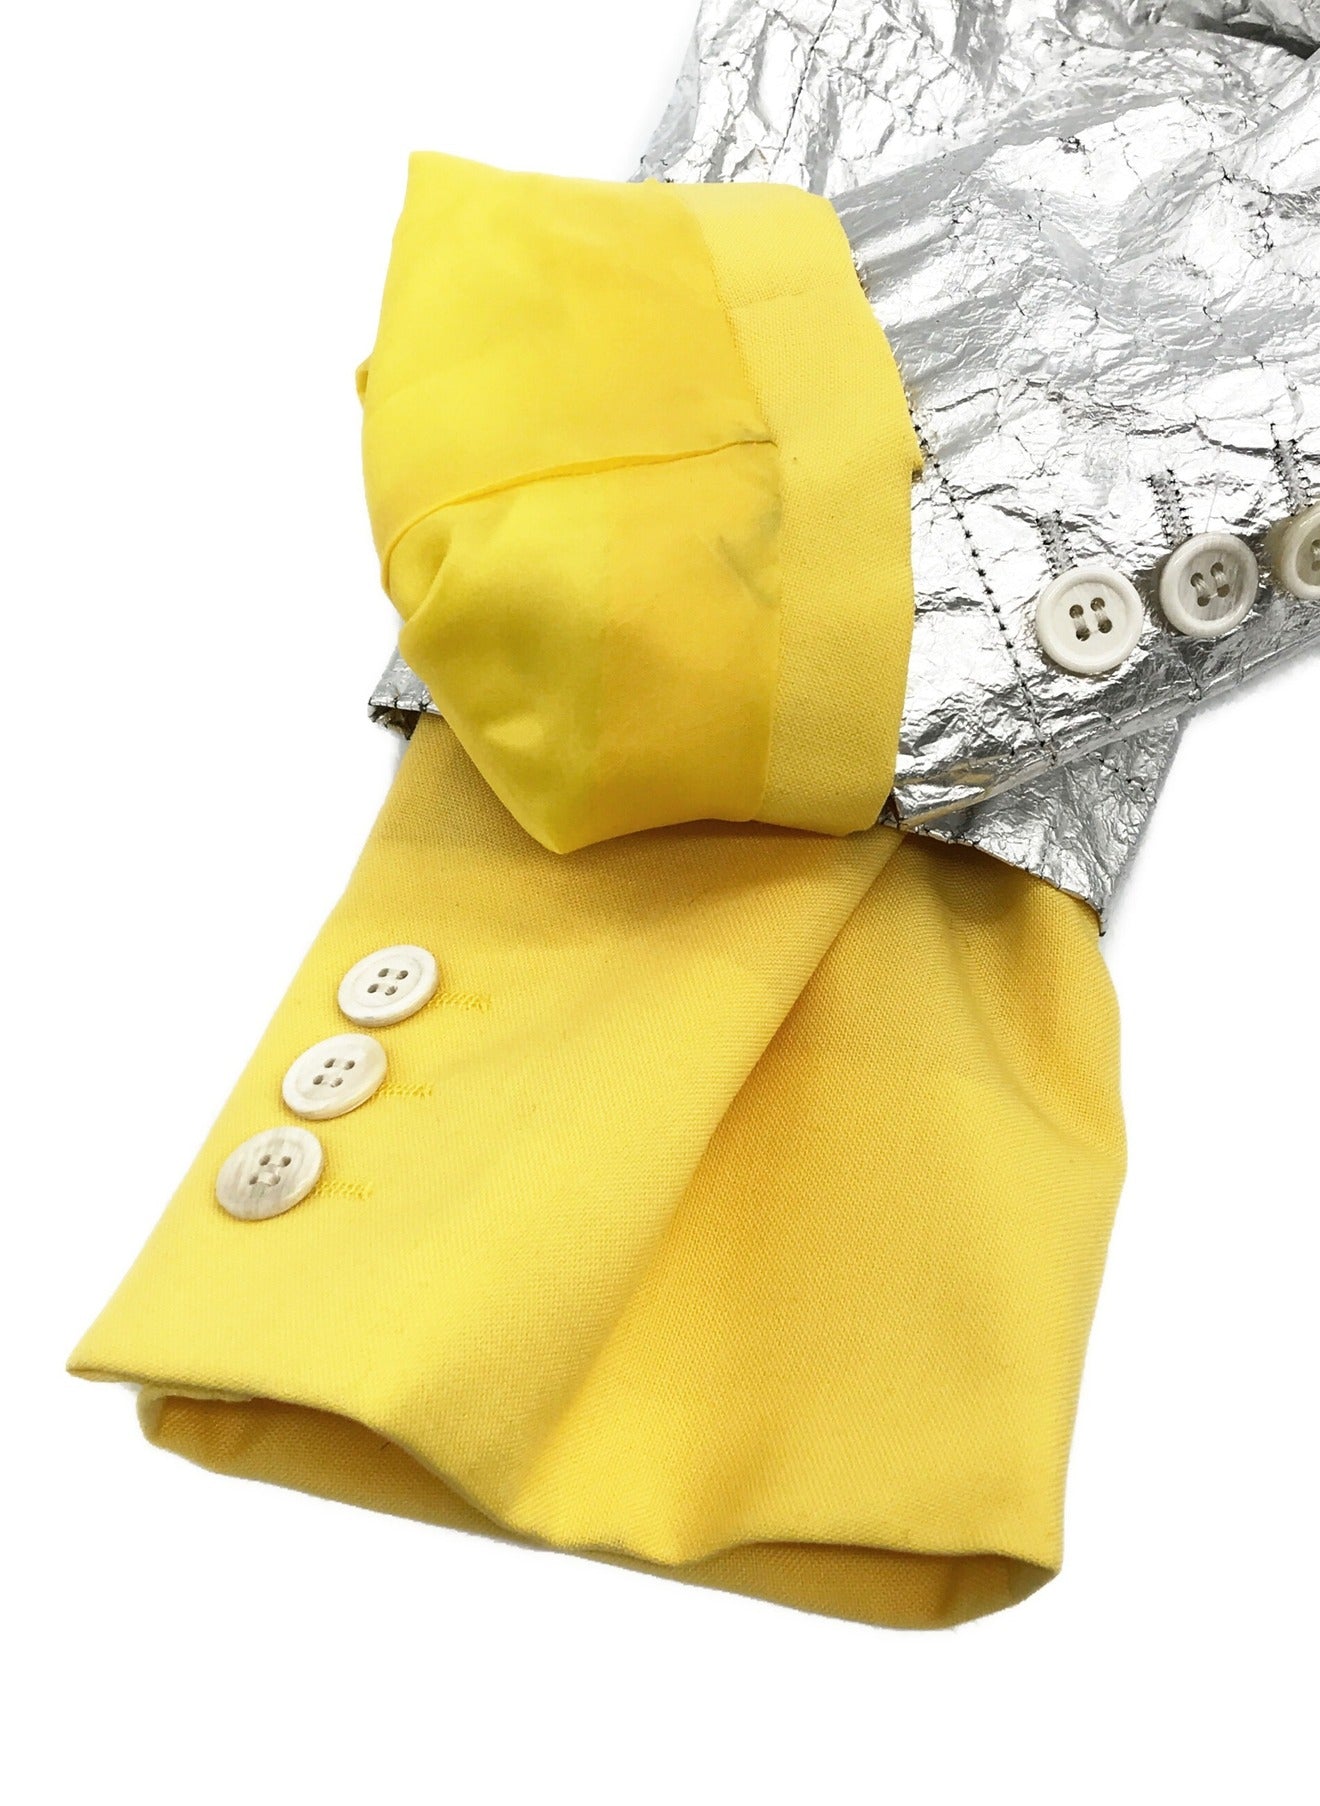 [Pre-owned] COMME des GARCONS Homme Plus CHROME/YELLOW DOUBLE LAYER BLAZER and DUAL WAISTBAND SHORTS